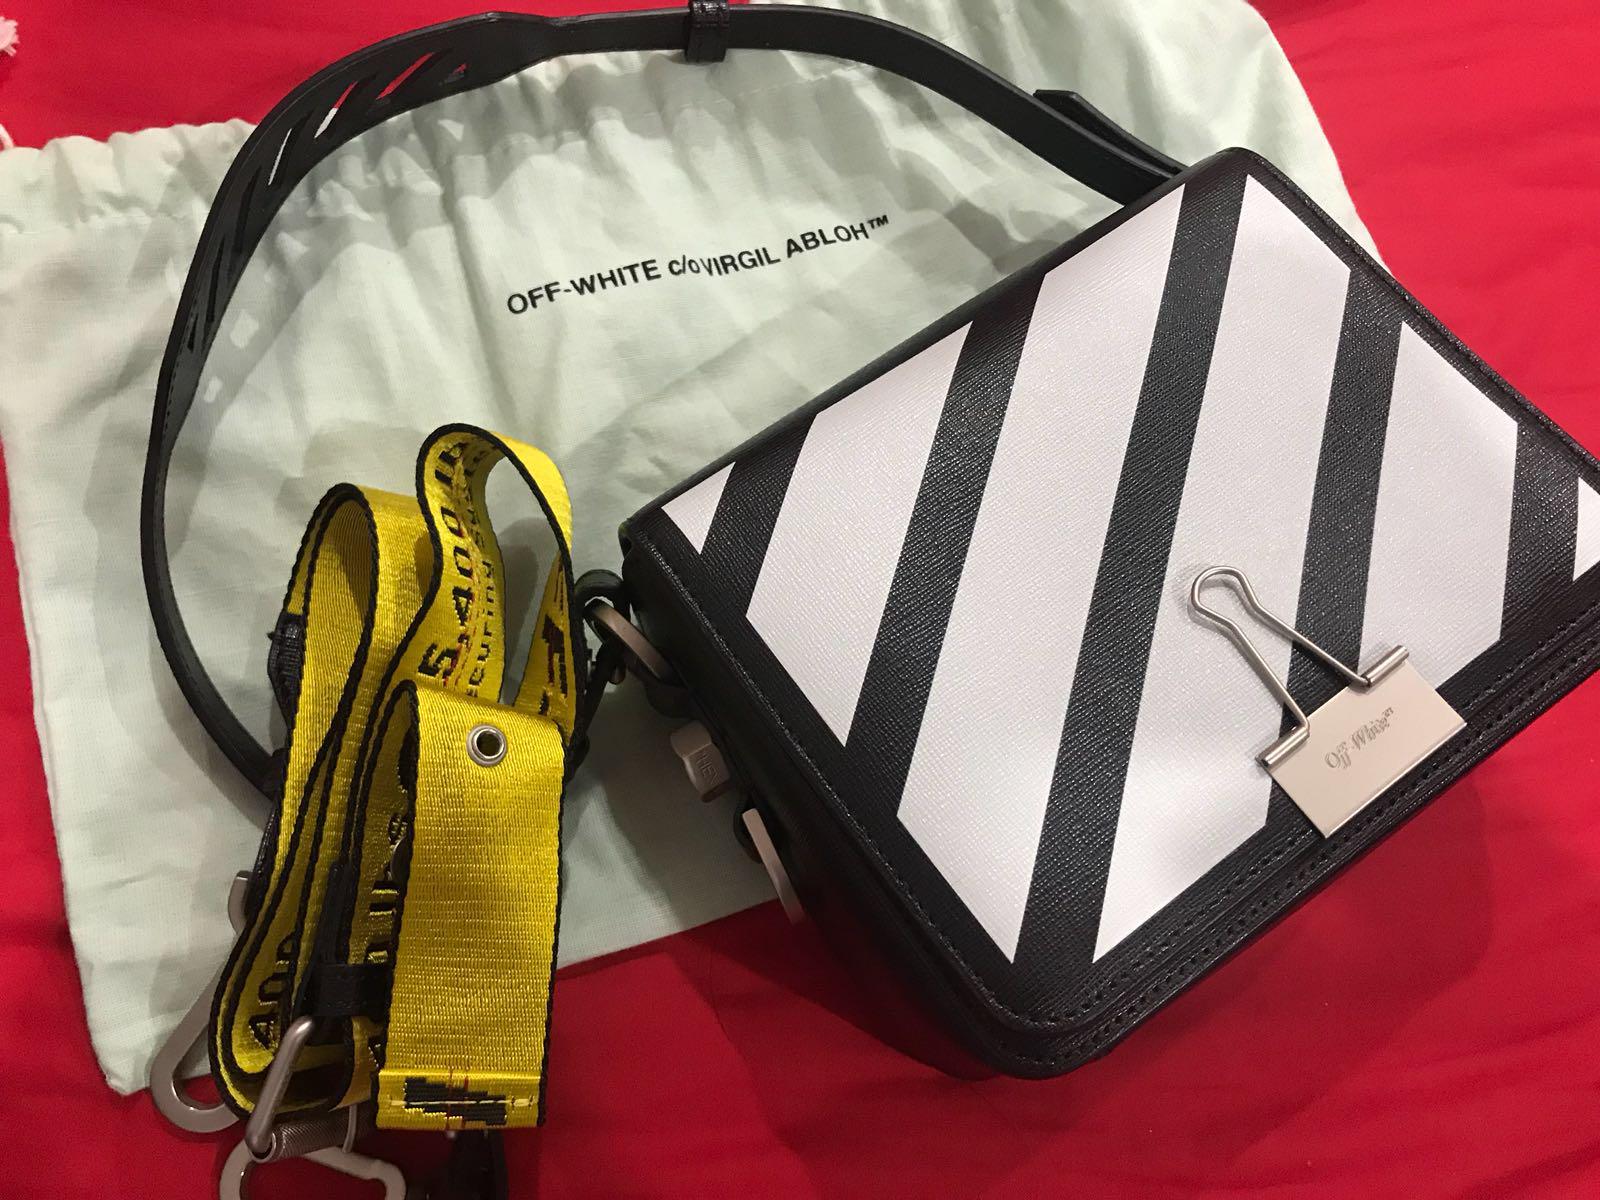 Off-White c/o Virgil Abloh Small Leather Screw Shoulder Bag in White